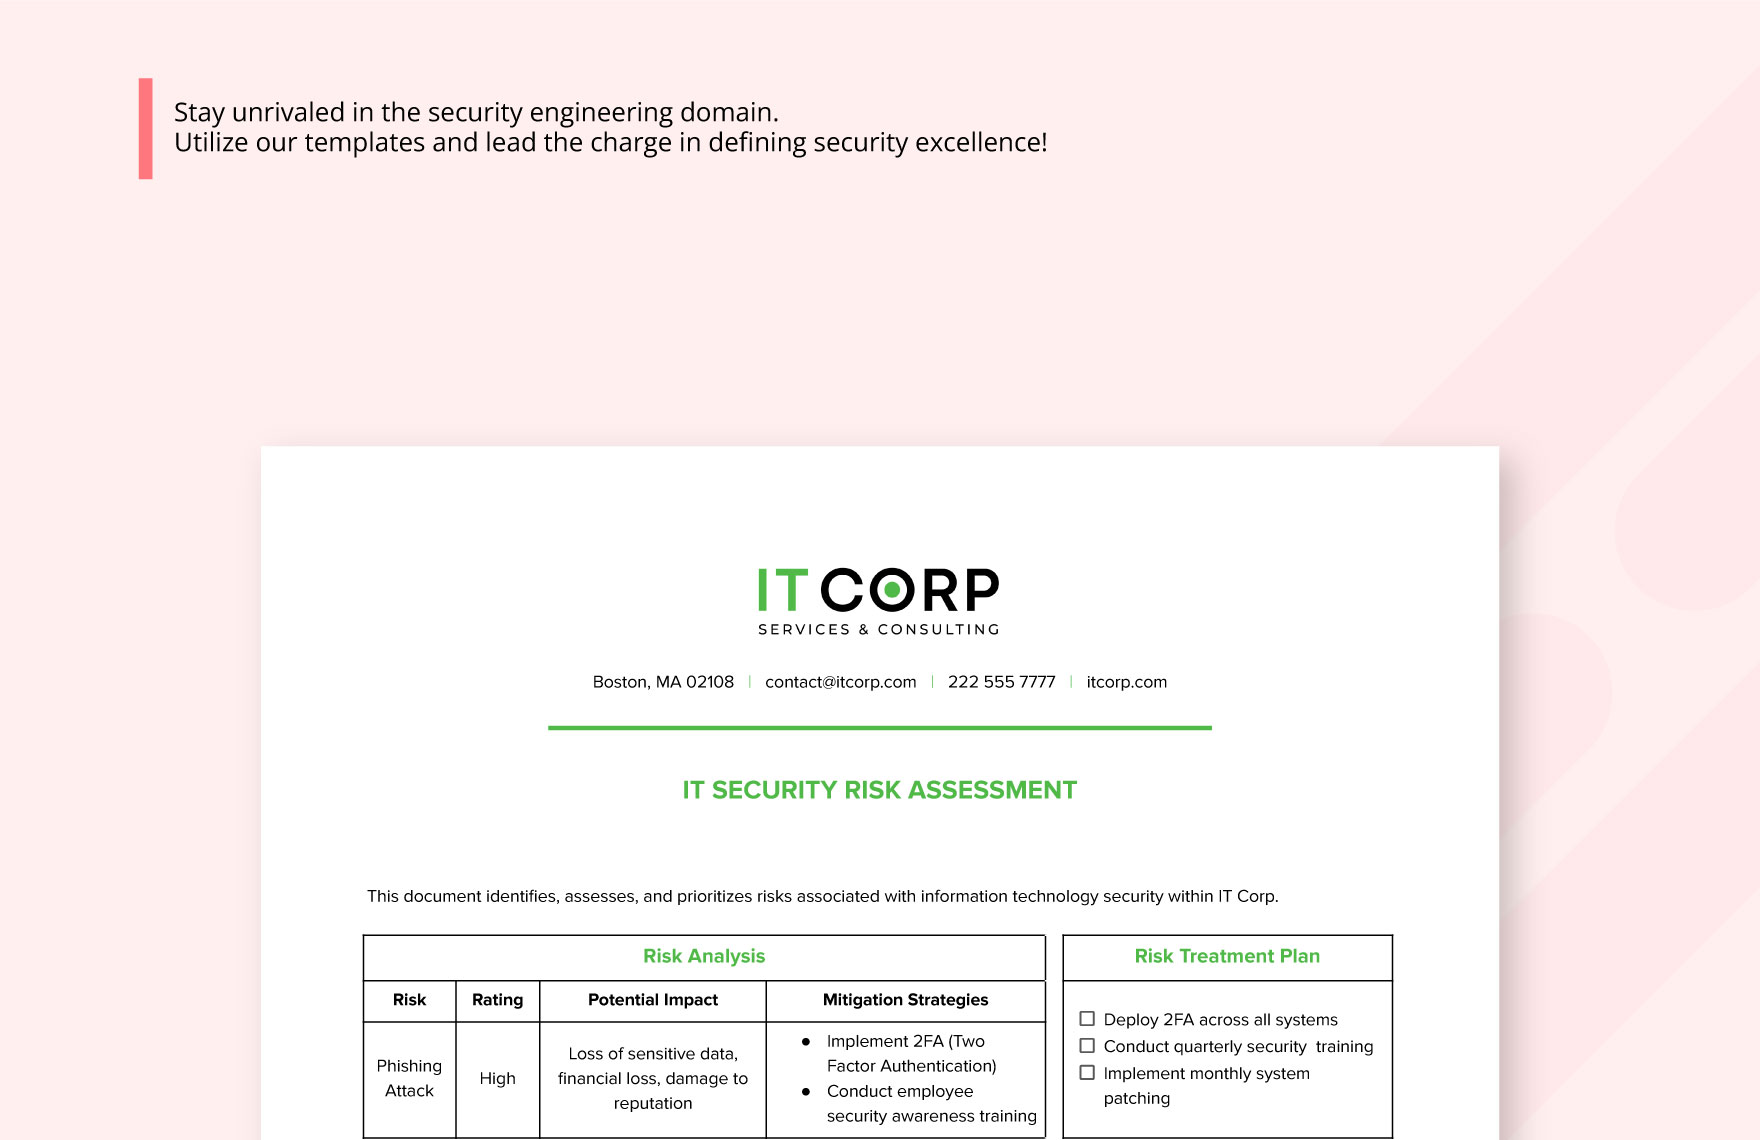 IT Security Risk Assessment Template